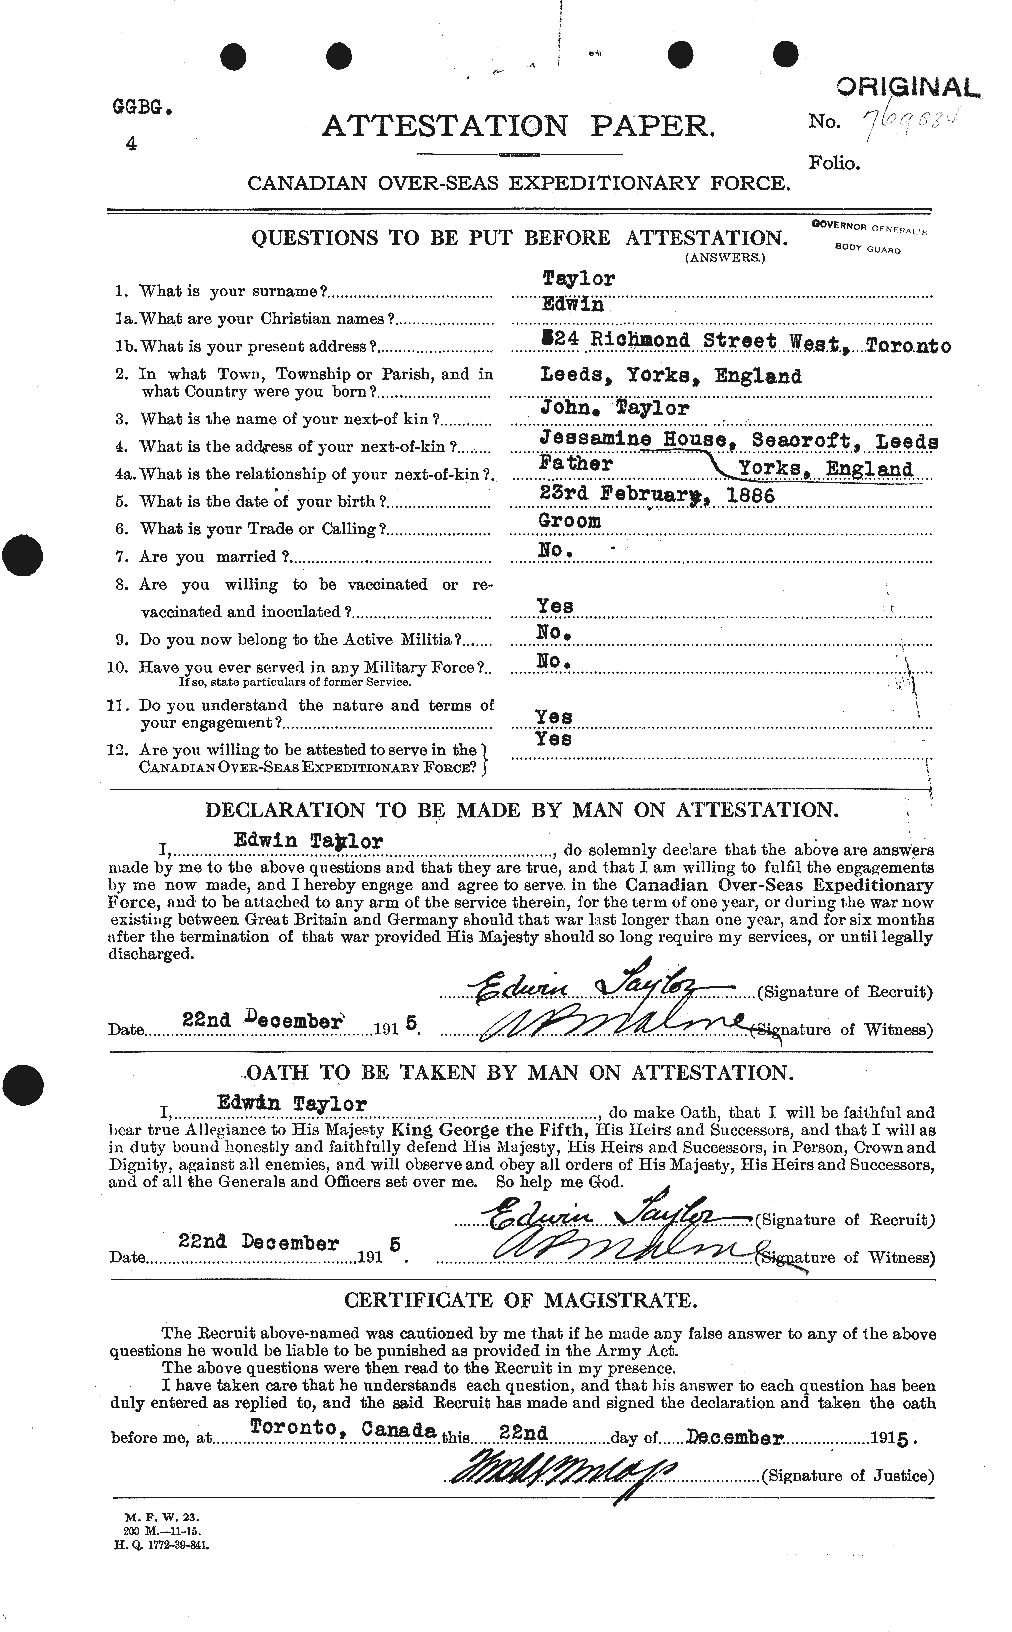 Personnel Records of the First World War - CEF 627333a